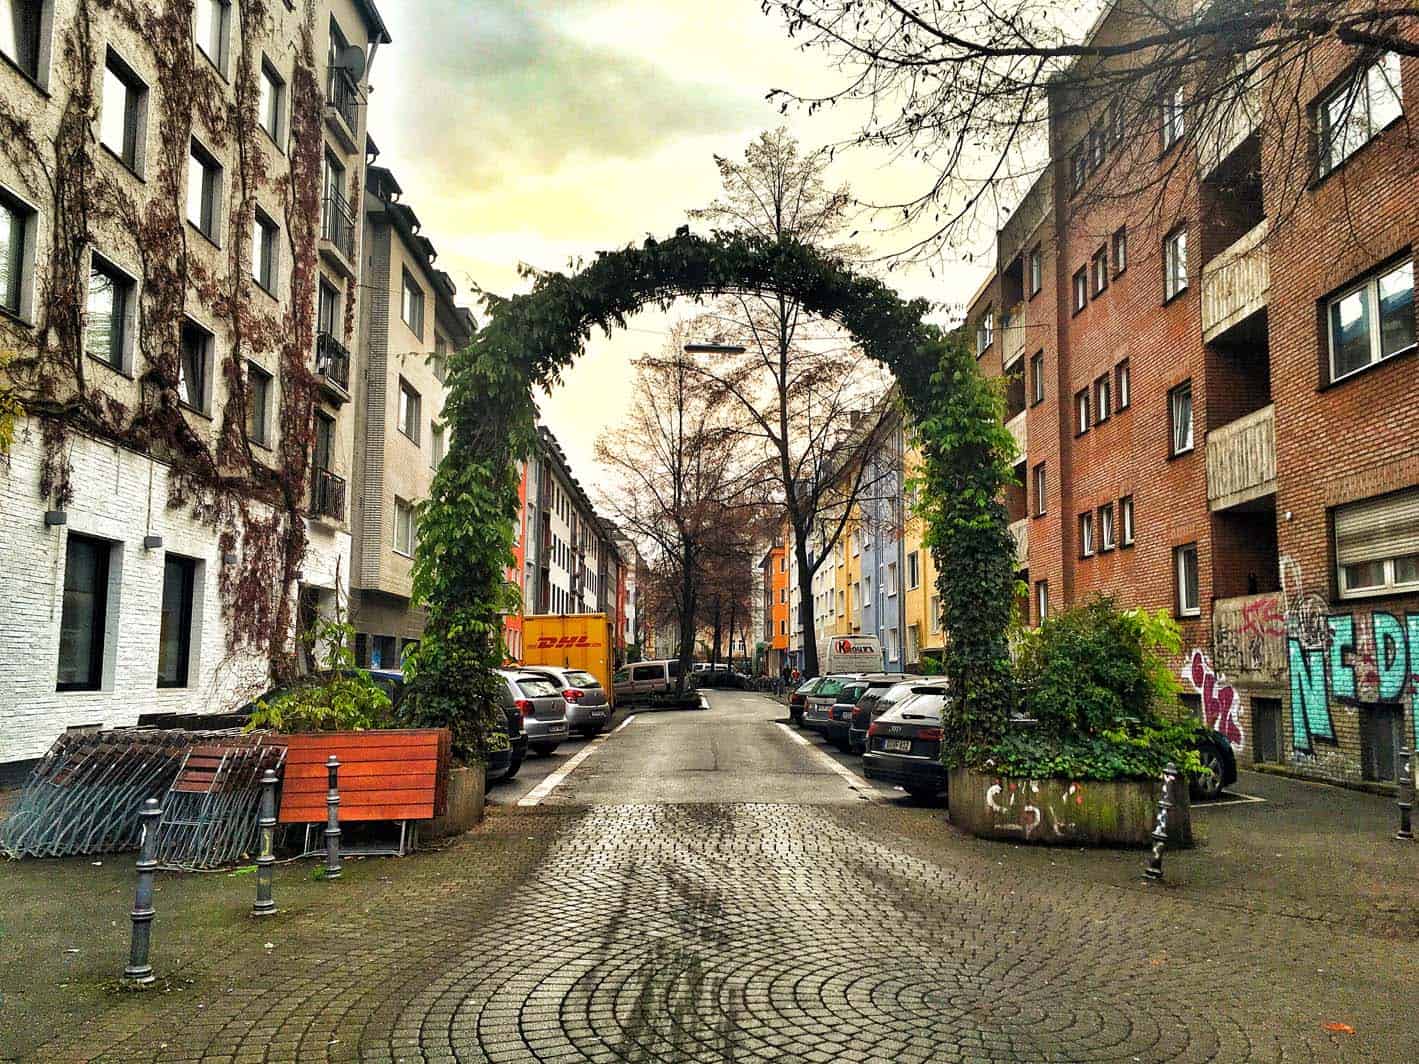 I saw a Cologne lawn arch as I wondered